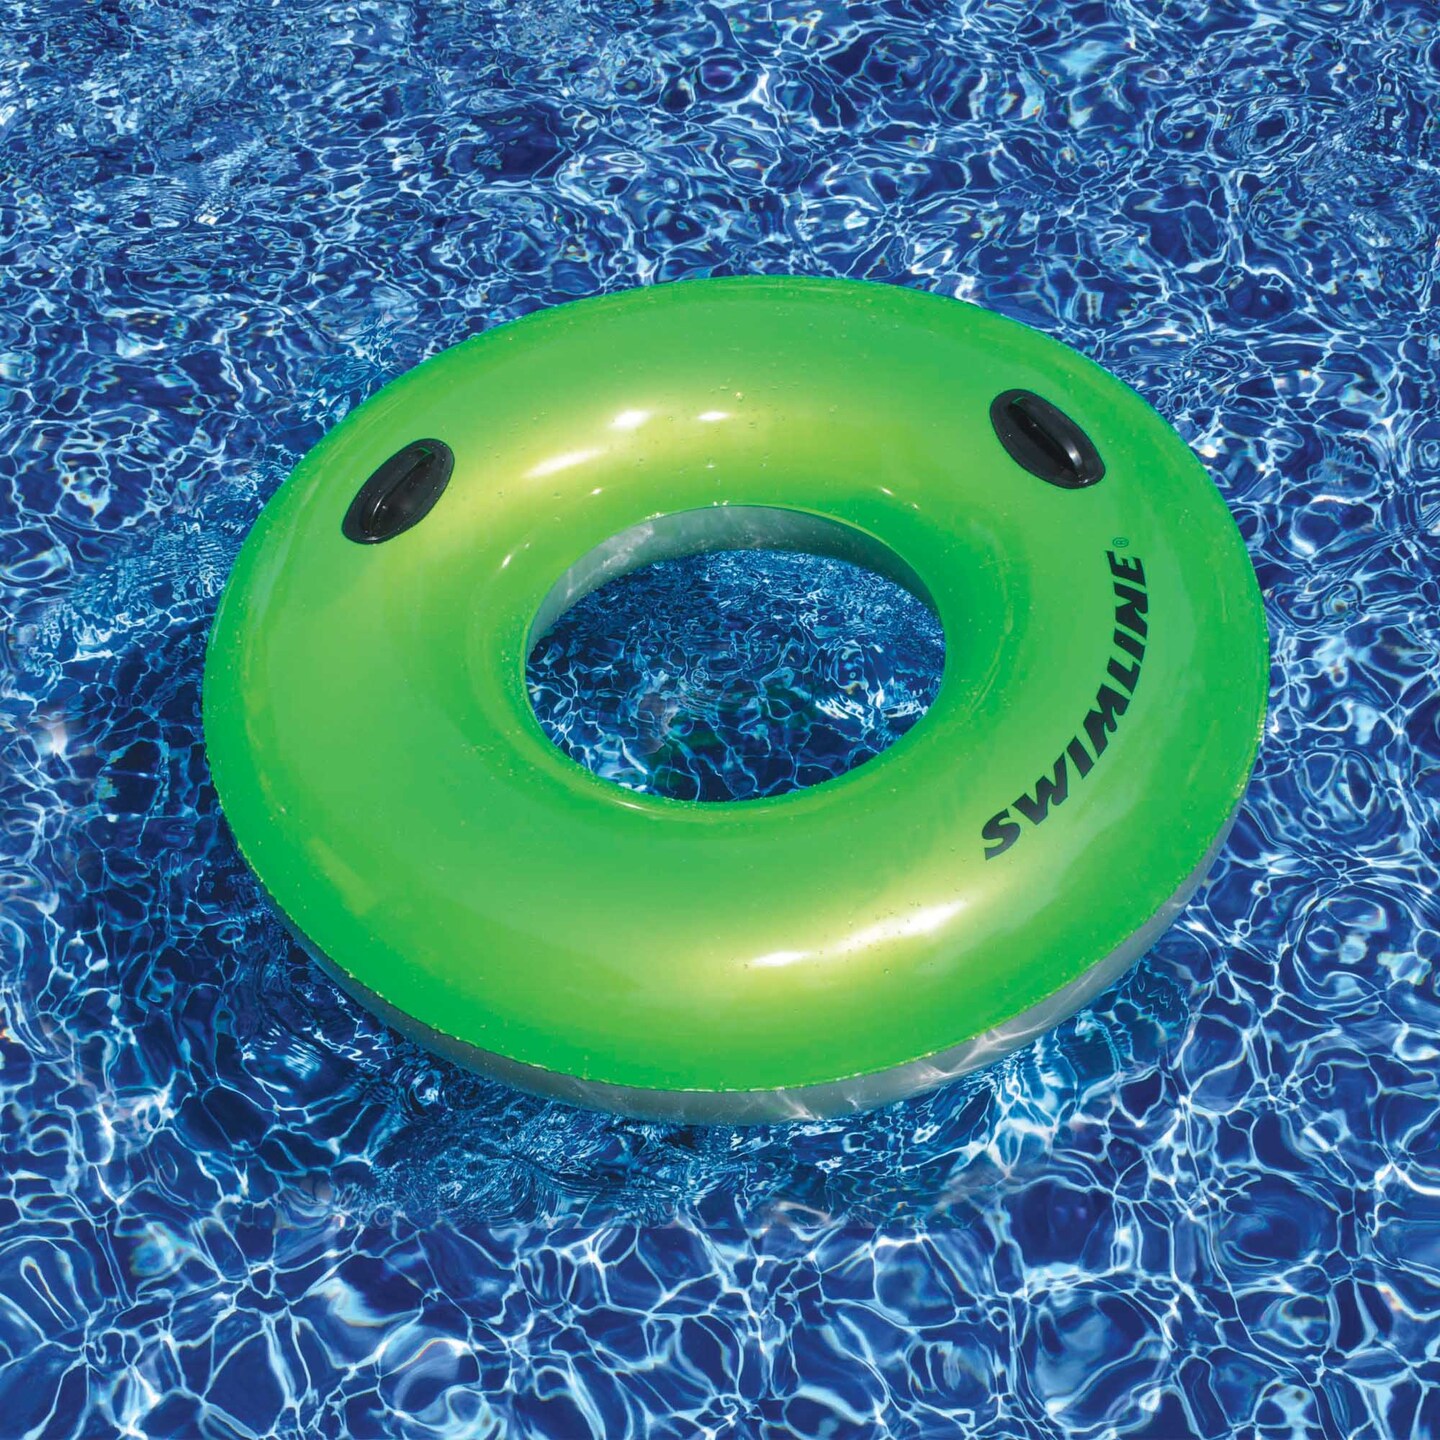 Amazon.com: Playtek 33 inch Pool Ring, Dino Playful Printed Pool Ring,  Durable Floats Tubes for Swimming on Beach, Pool, Water Sports for Adults  and Kids, Large : Toys & Games